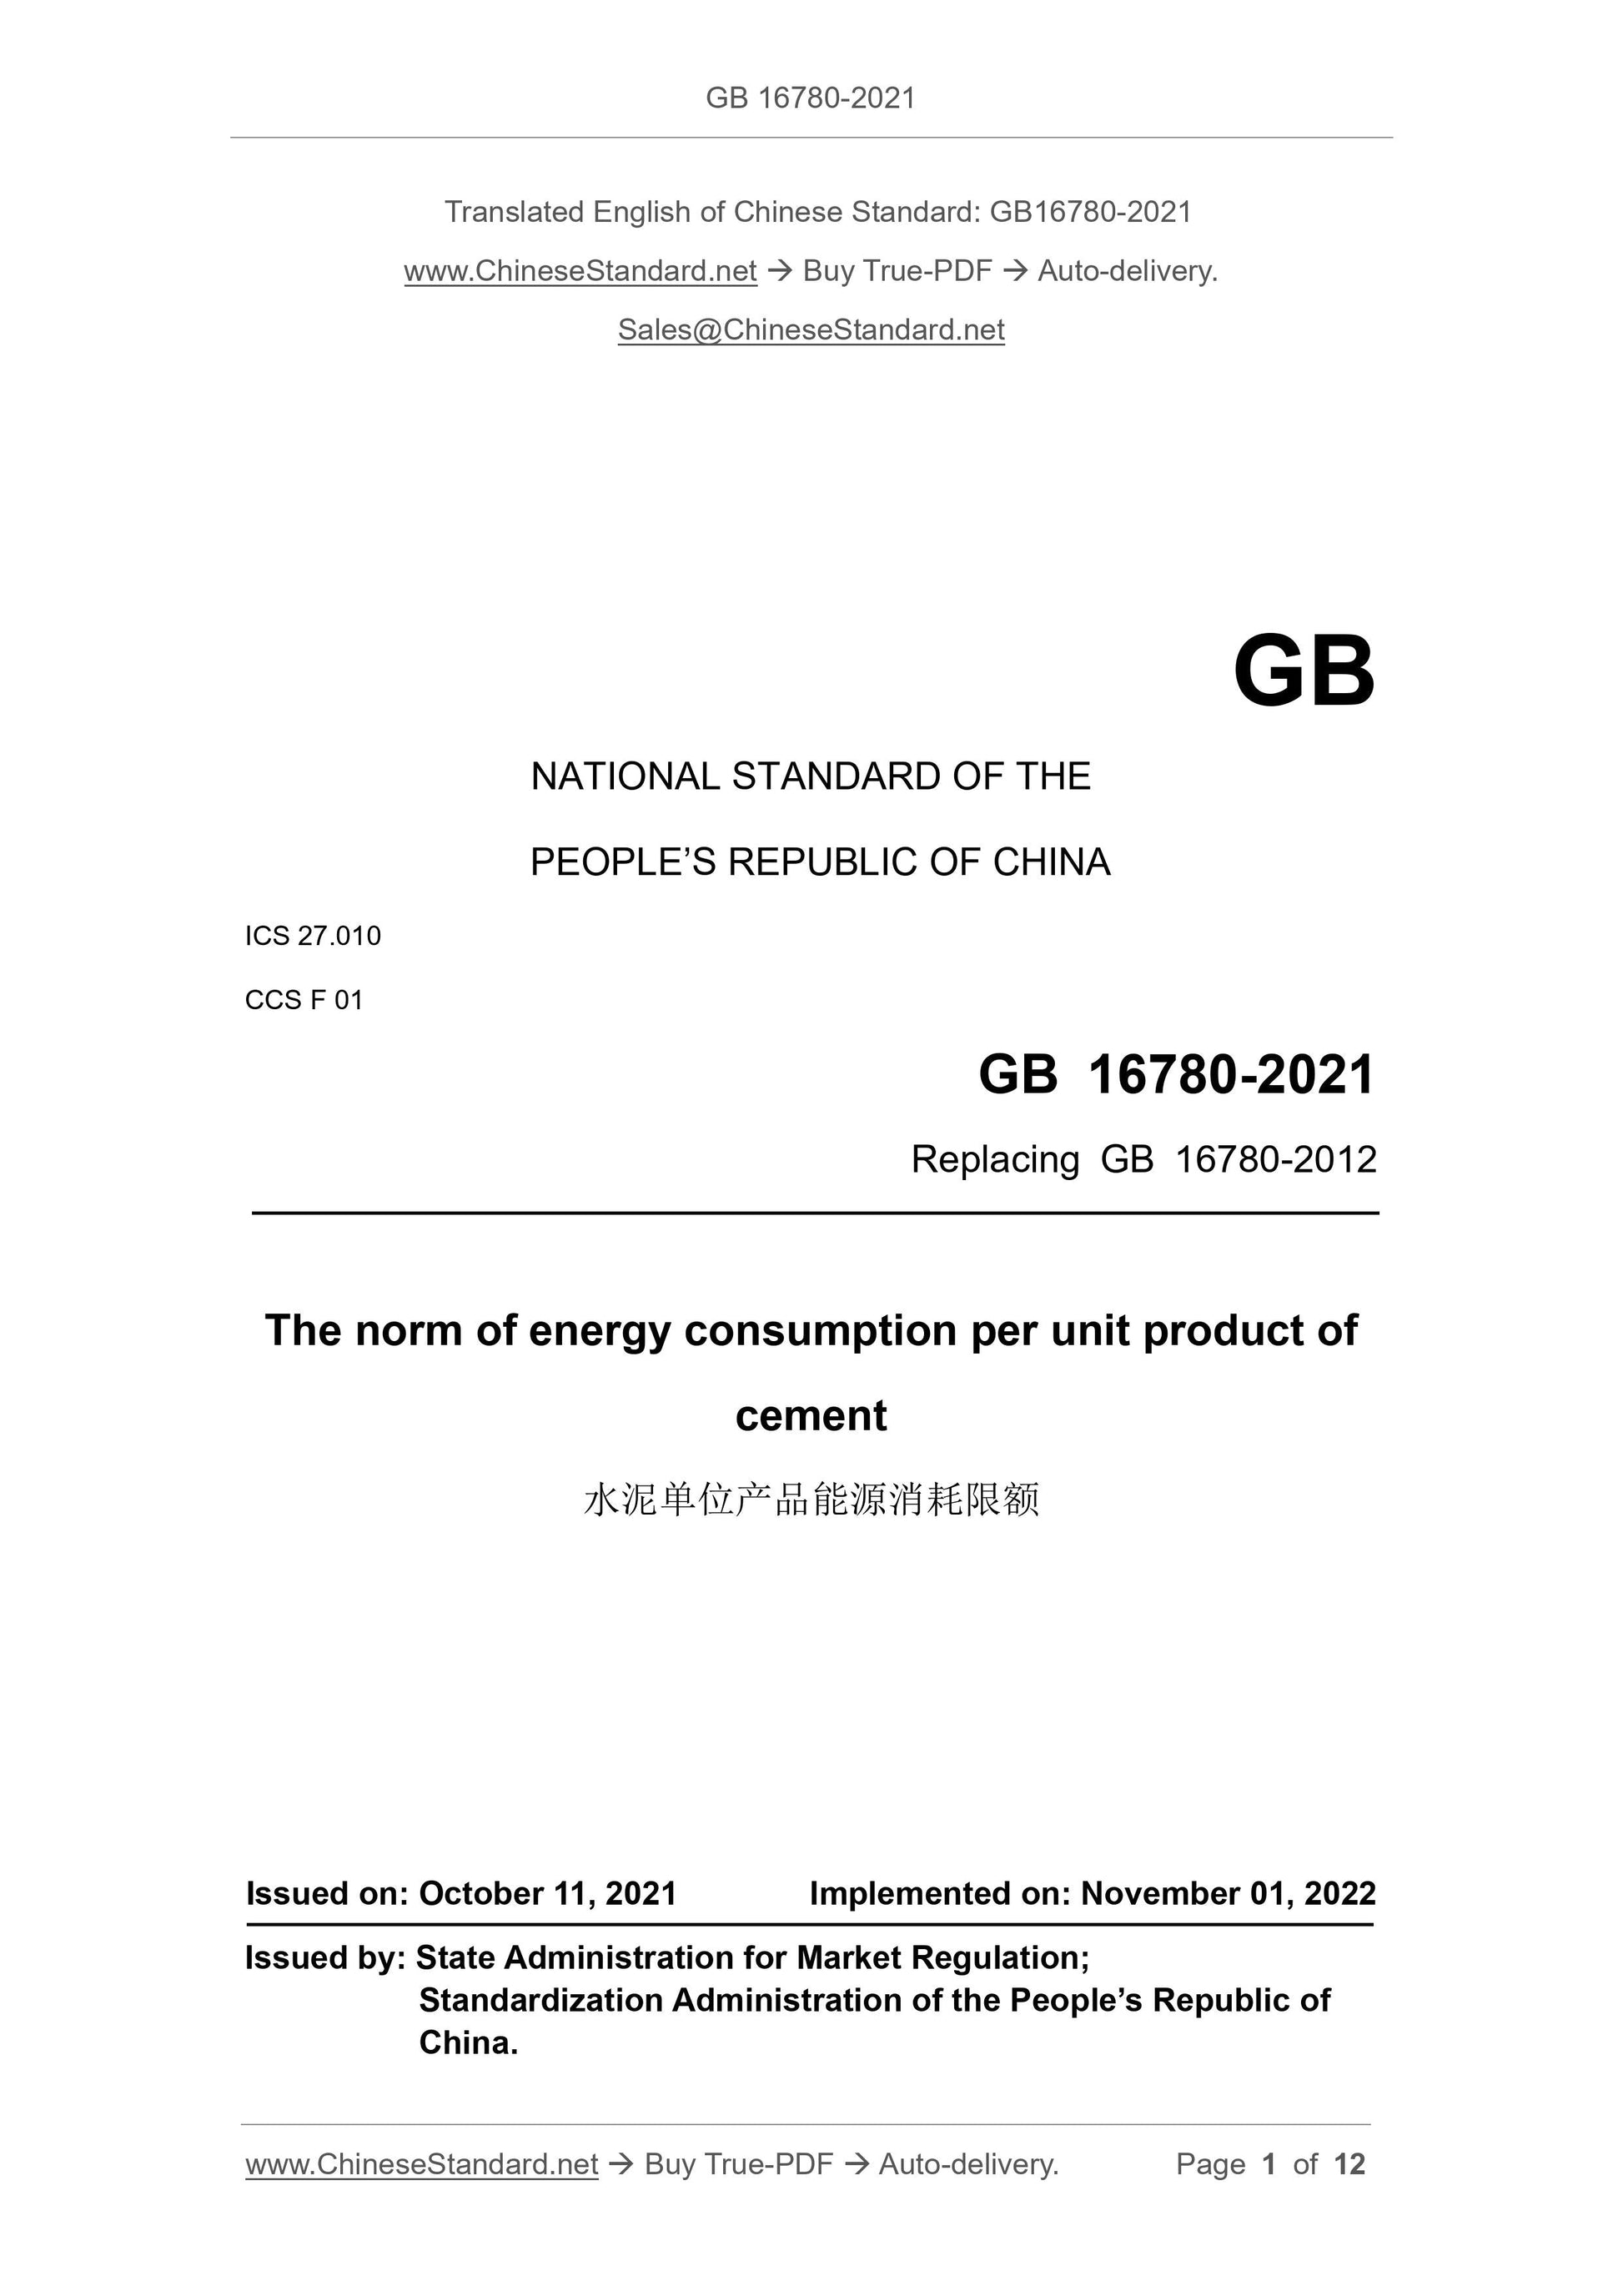 GB 16780-2021 Page 1